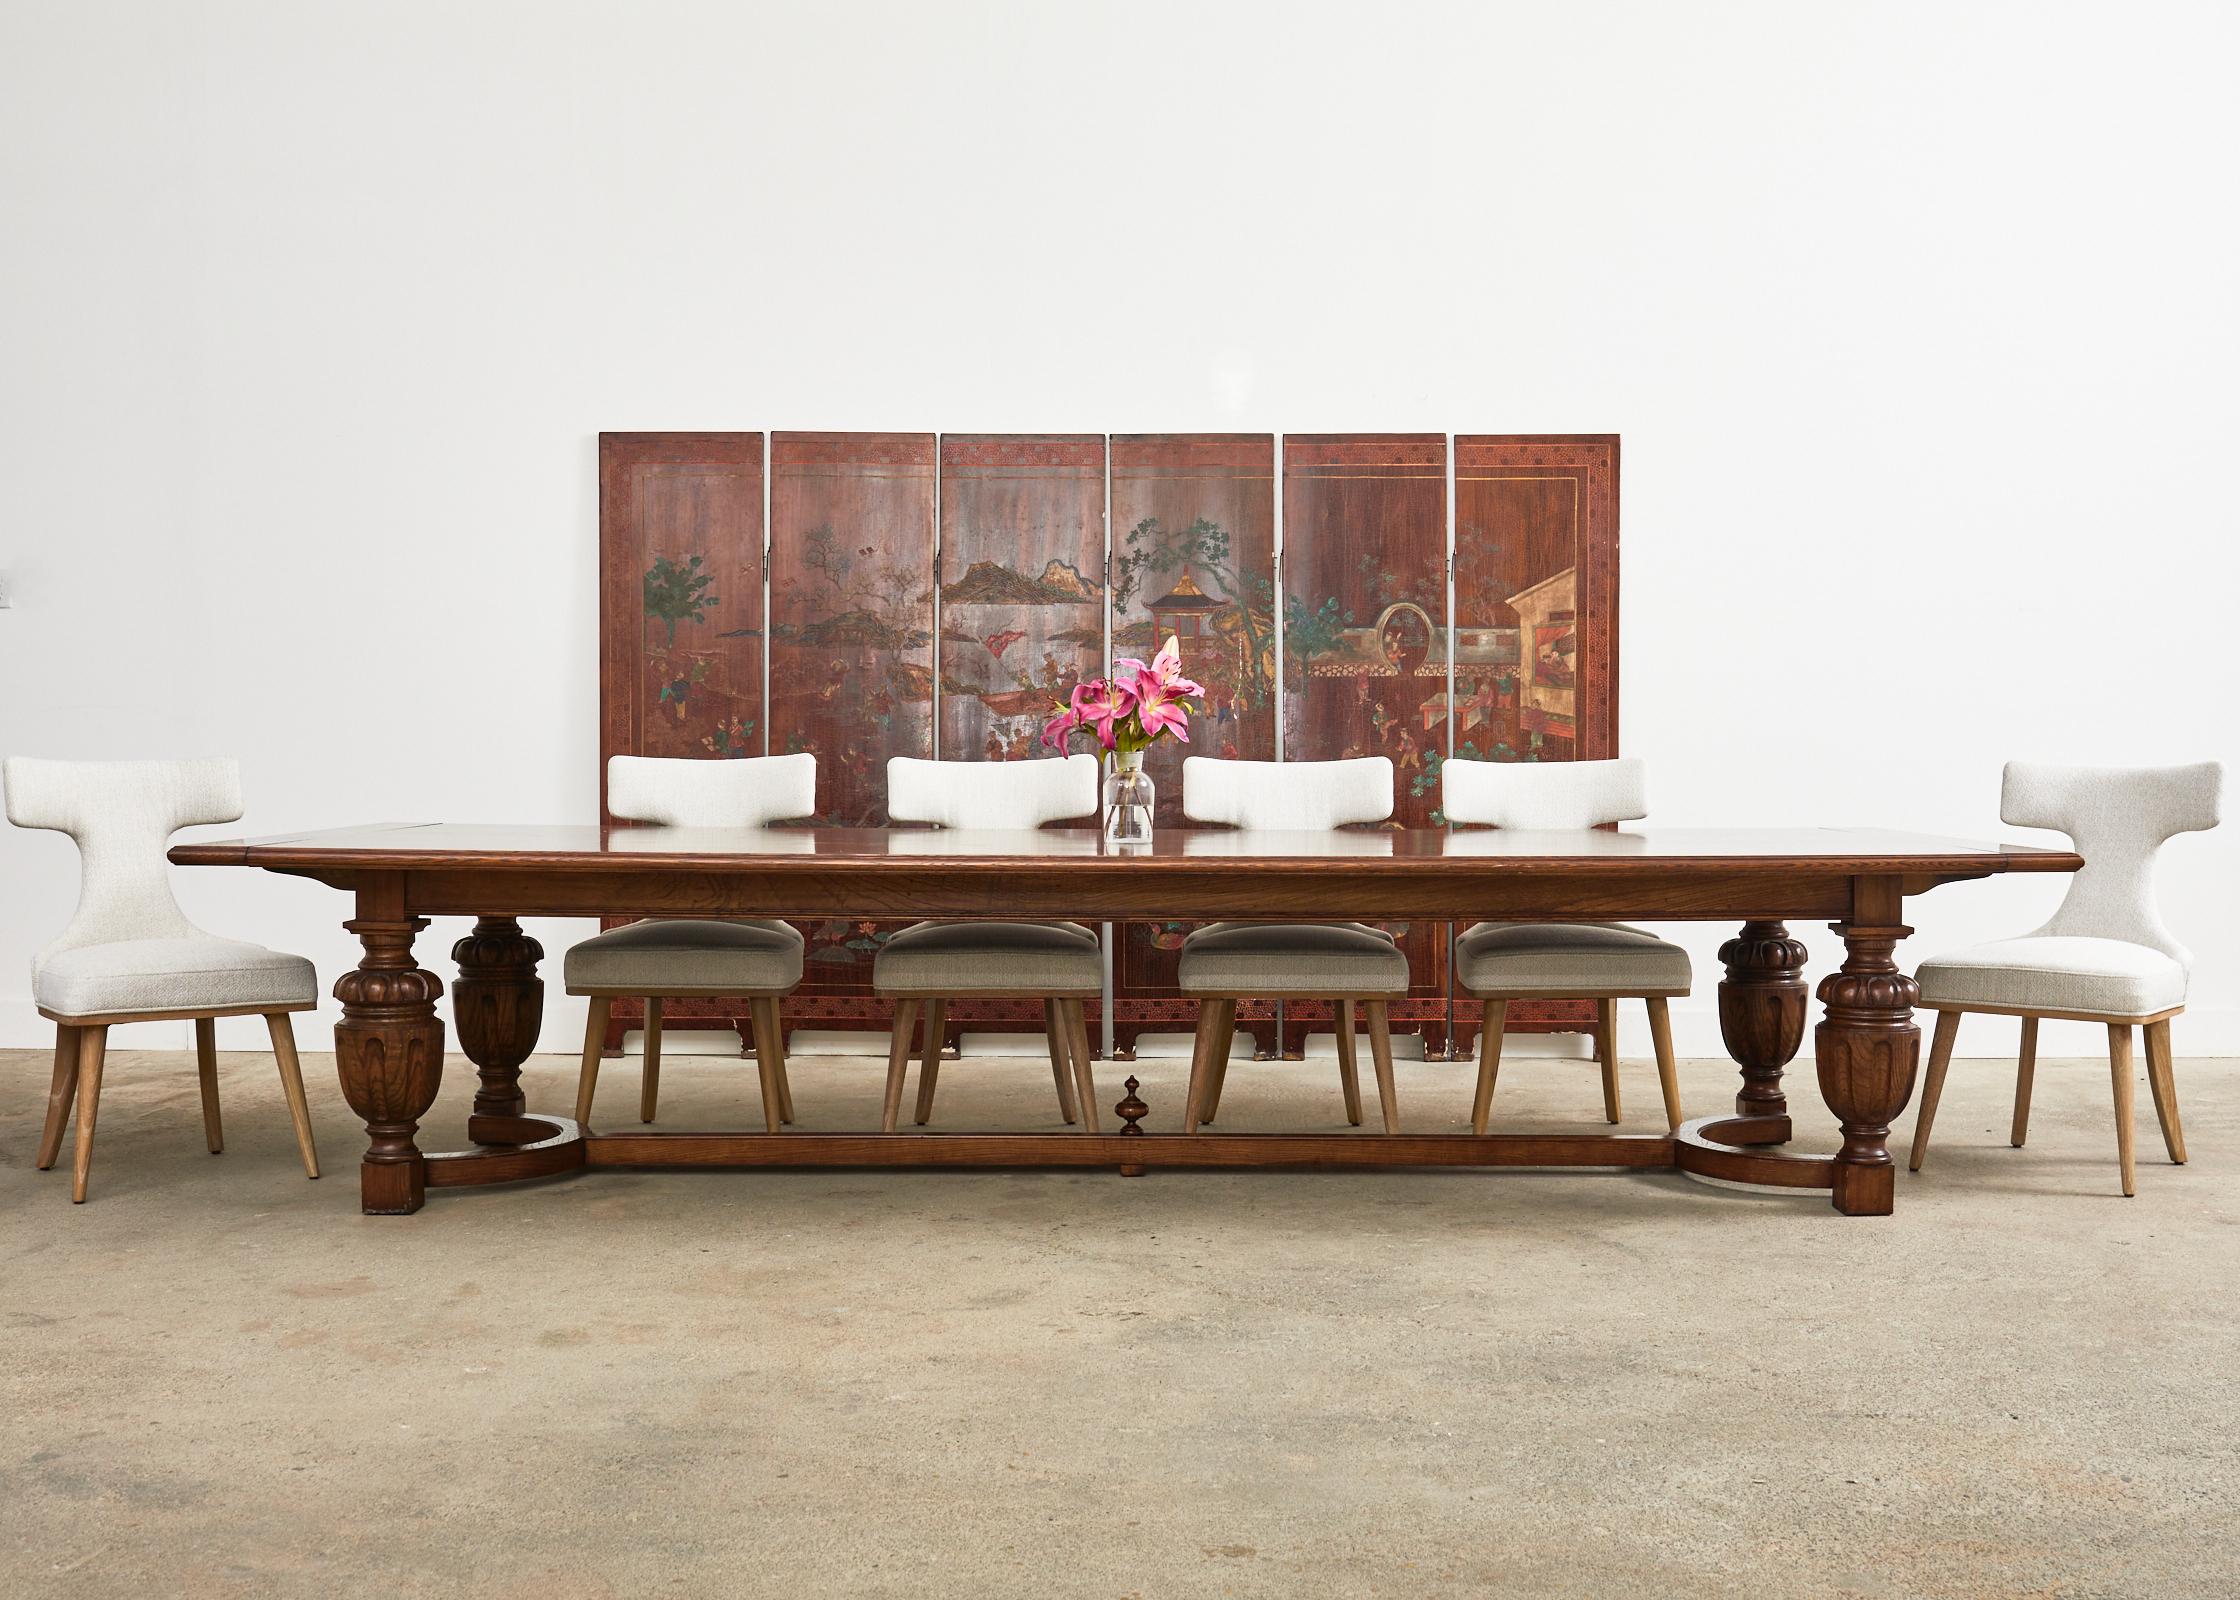 Grand Italian refectory table or dining table crafted from oak in the baroque taste. The table is made on a monumental scale with two extending leaves measuring 20 inches each. Measuring 144 inches long when closed and 184 inches long with two